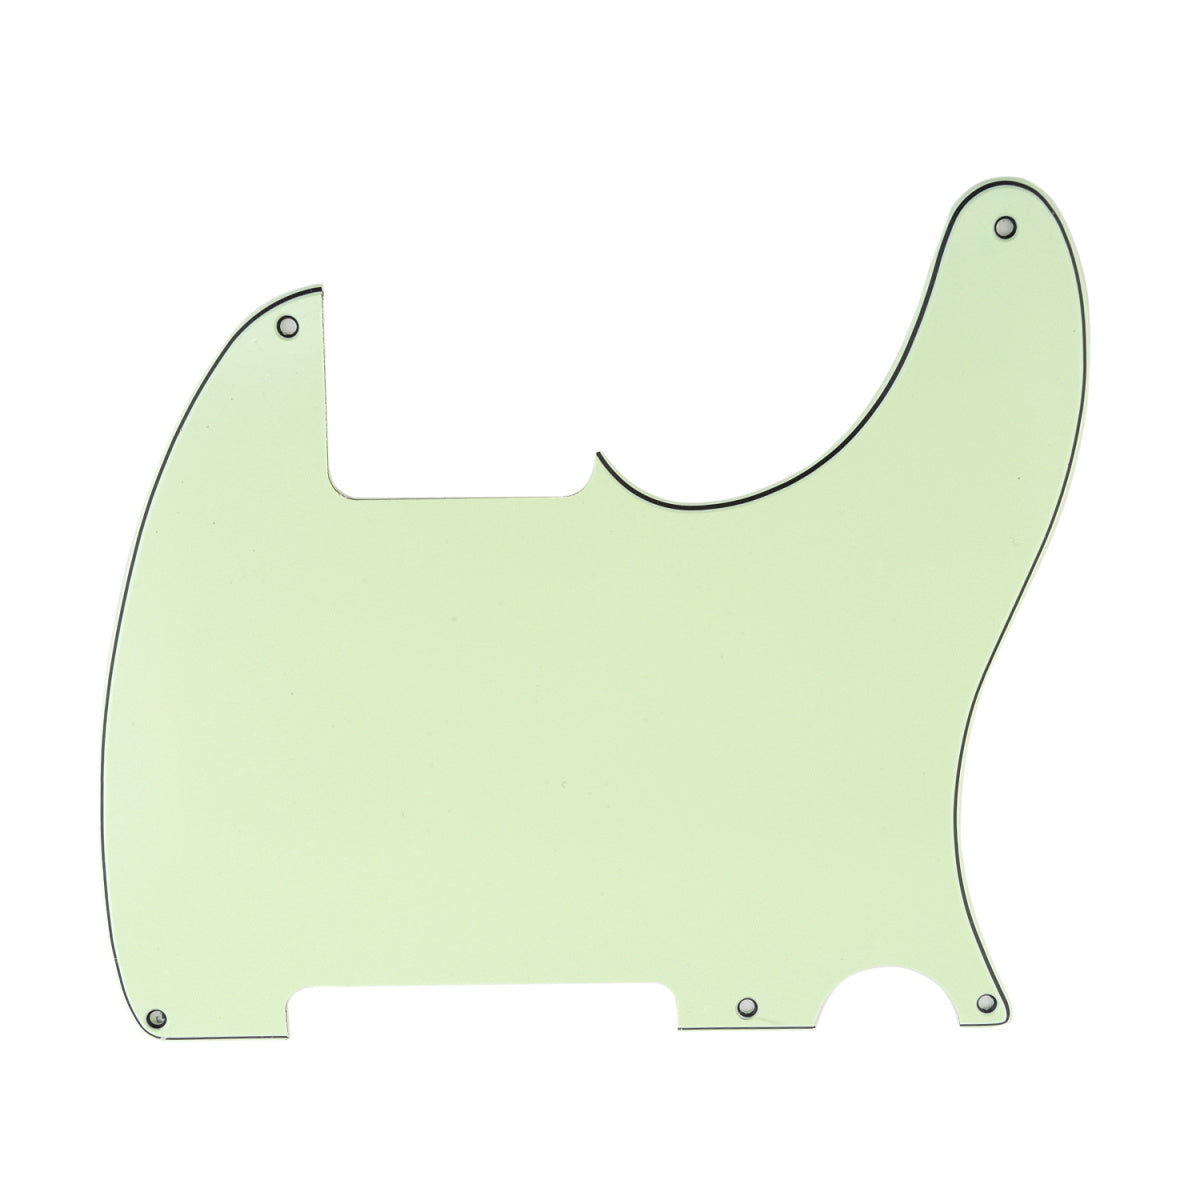 Musiclily 5 Hole Tele Pickguard Blank for Fender USA/Mexican Telecaster Esquire Guitar, 3Ply Mint